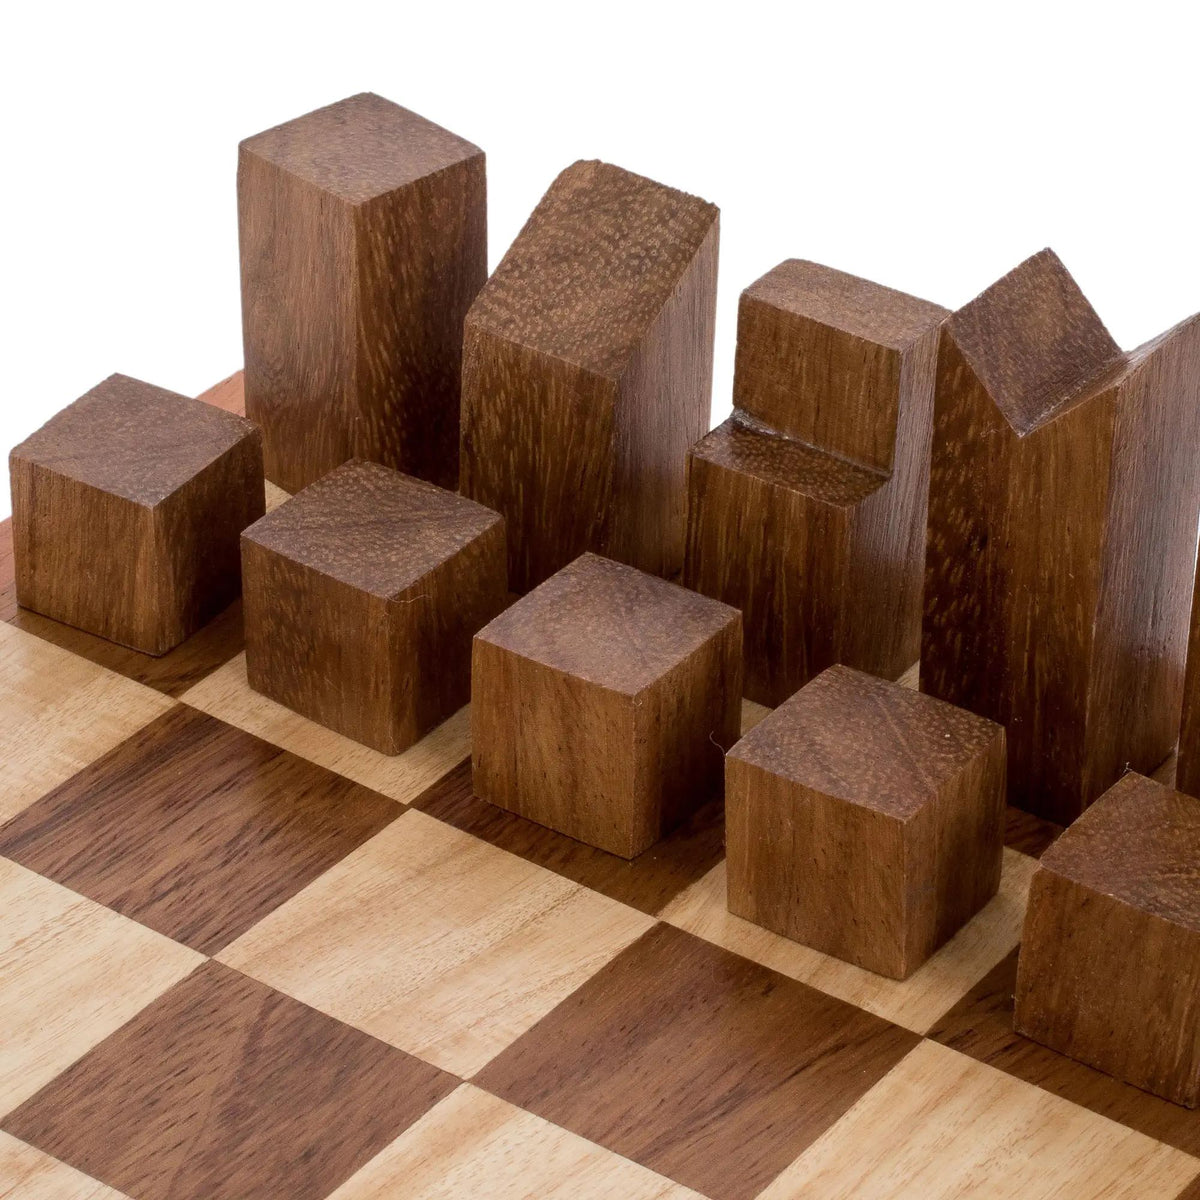 CityScape Modern Art Deco Wood Chess Set - Hand Crafted in Guatemala